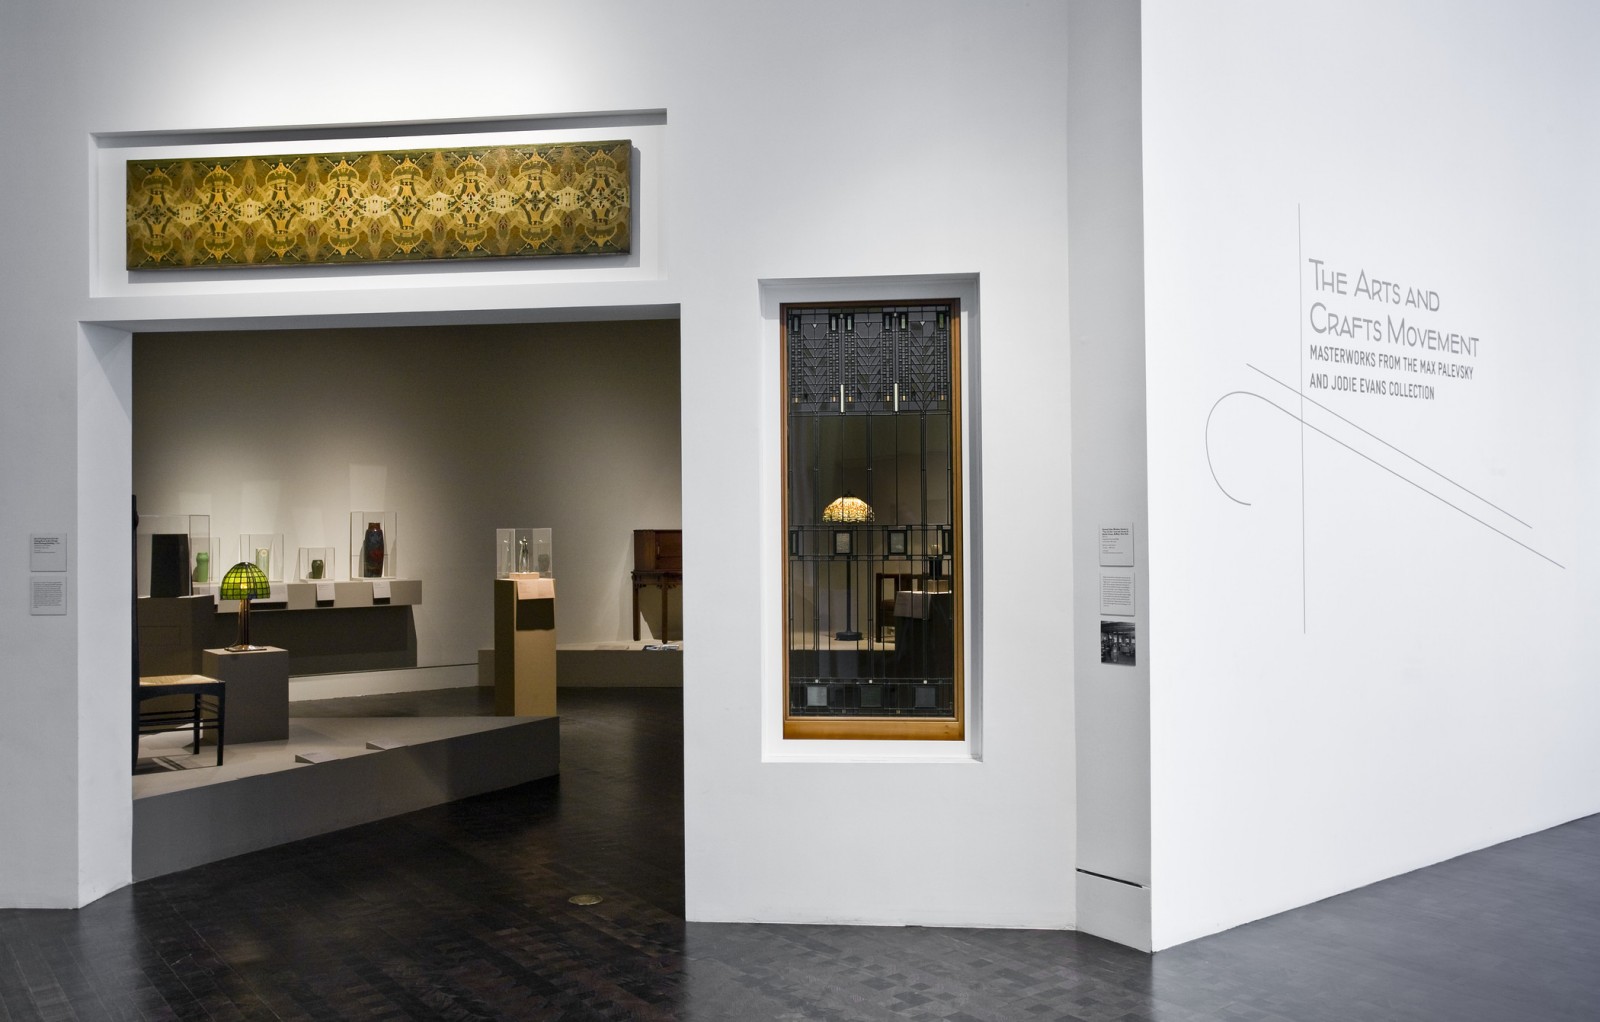 Install Shot: The Arts and Crafts Movement